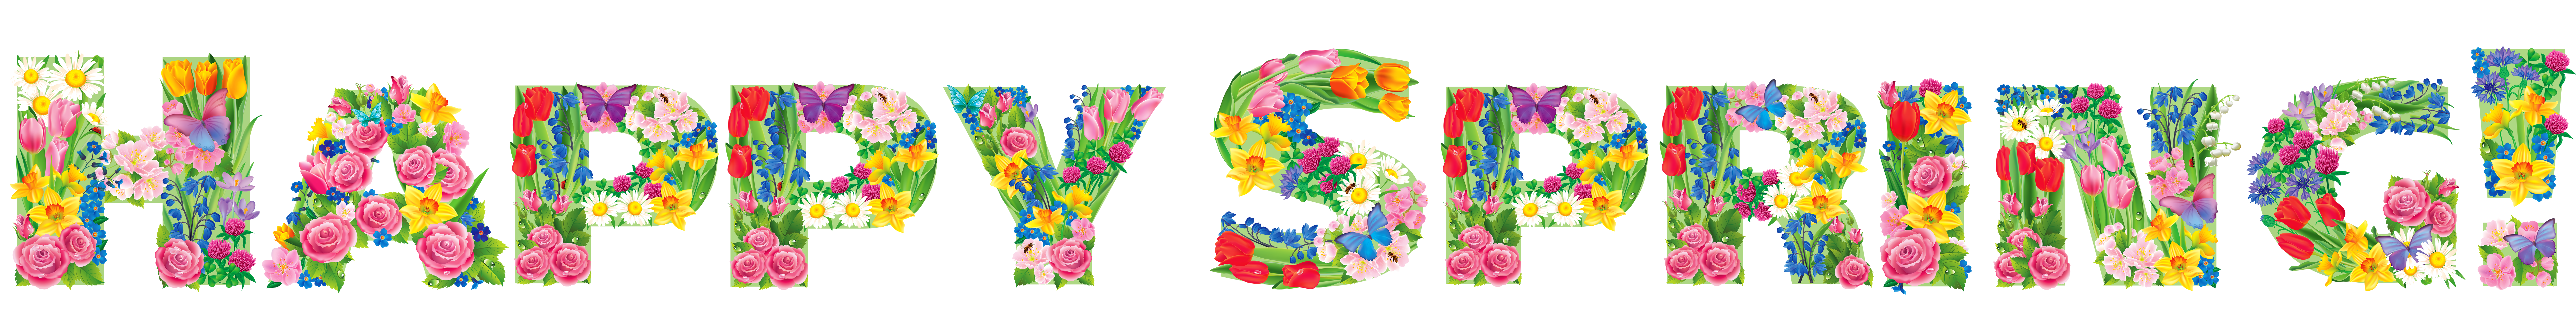 free spring clipart banners - photo #15